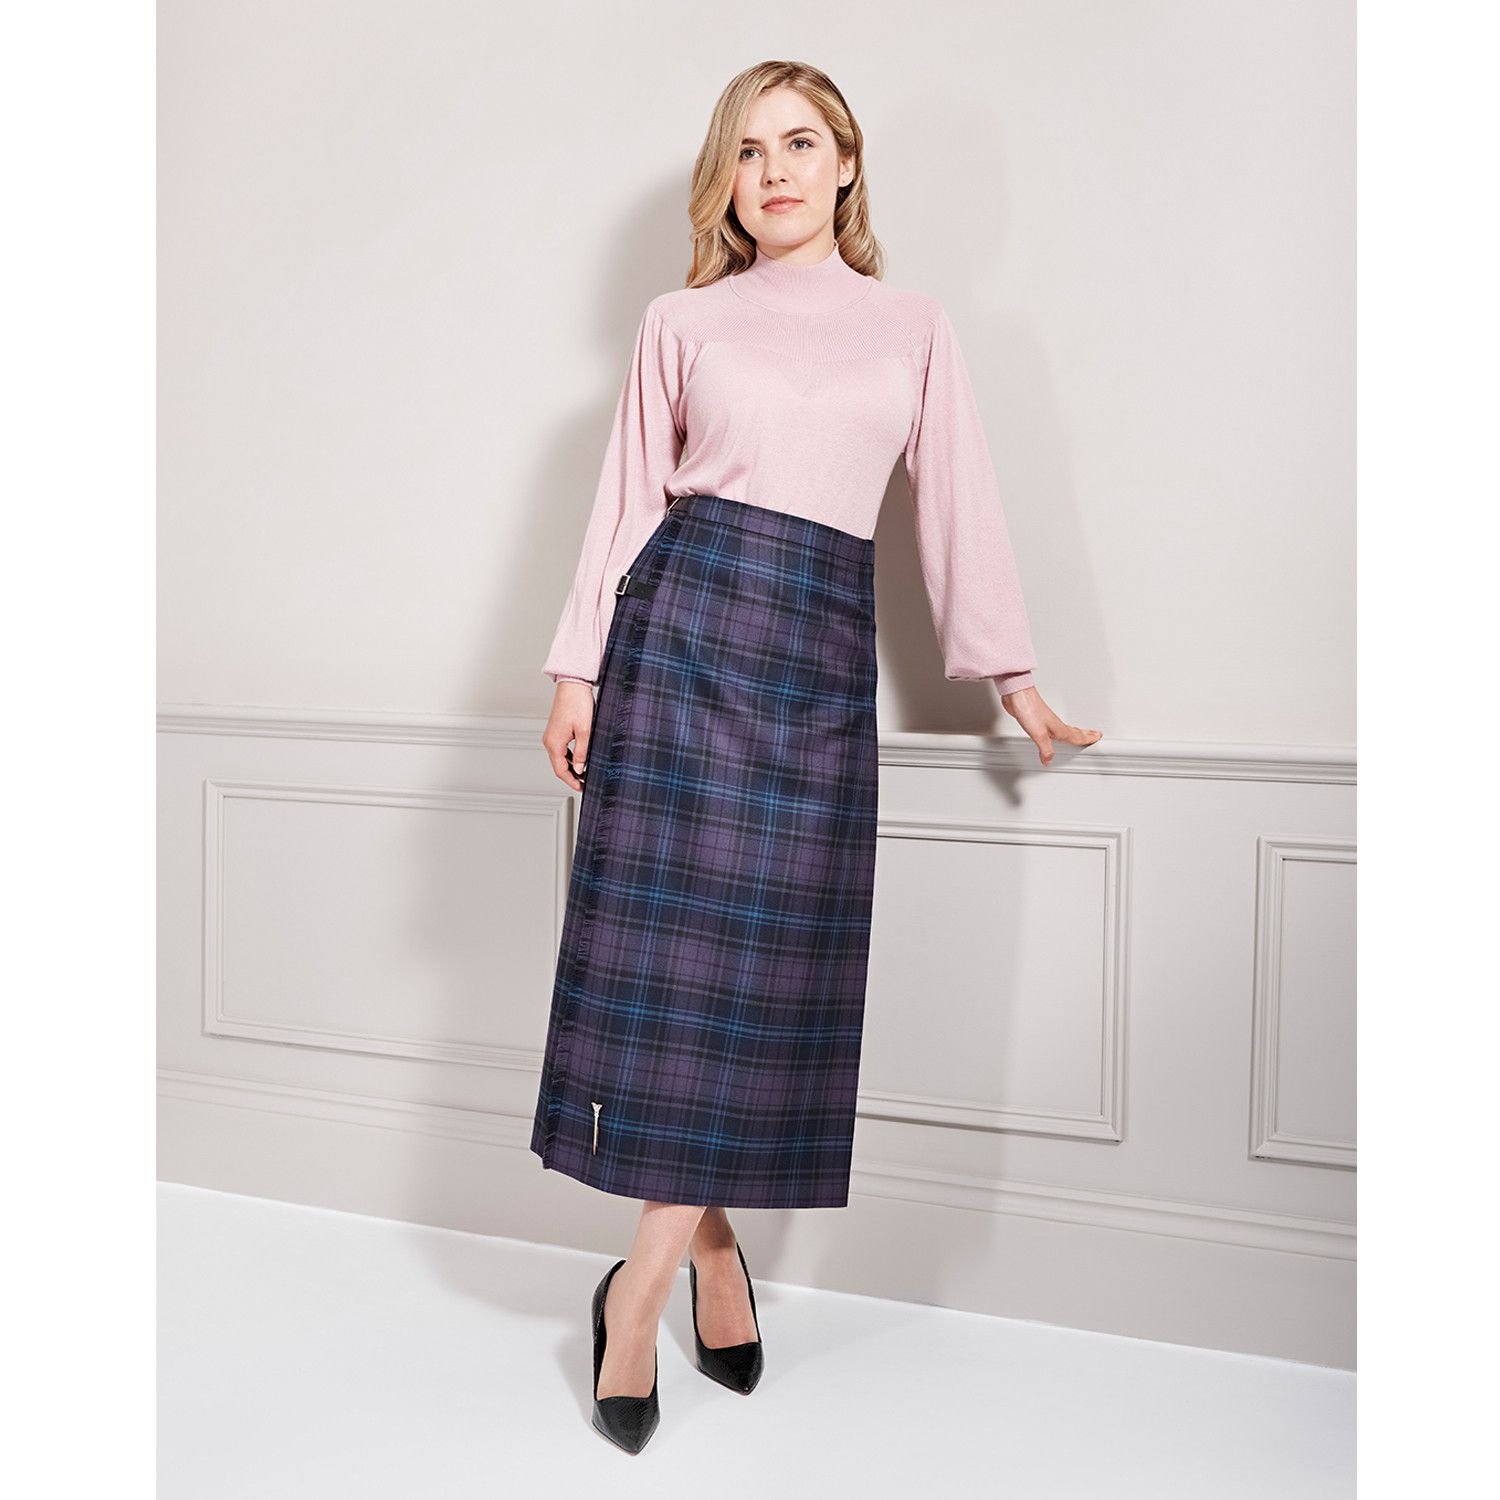 How to wear a midi skirt style tips and advice for midi skirts